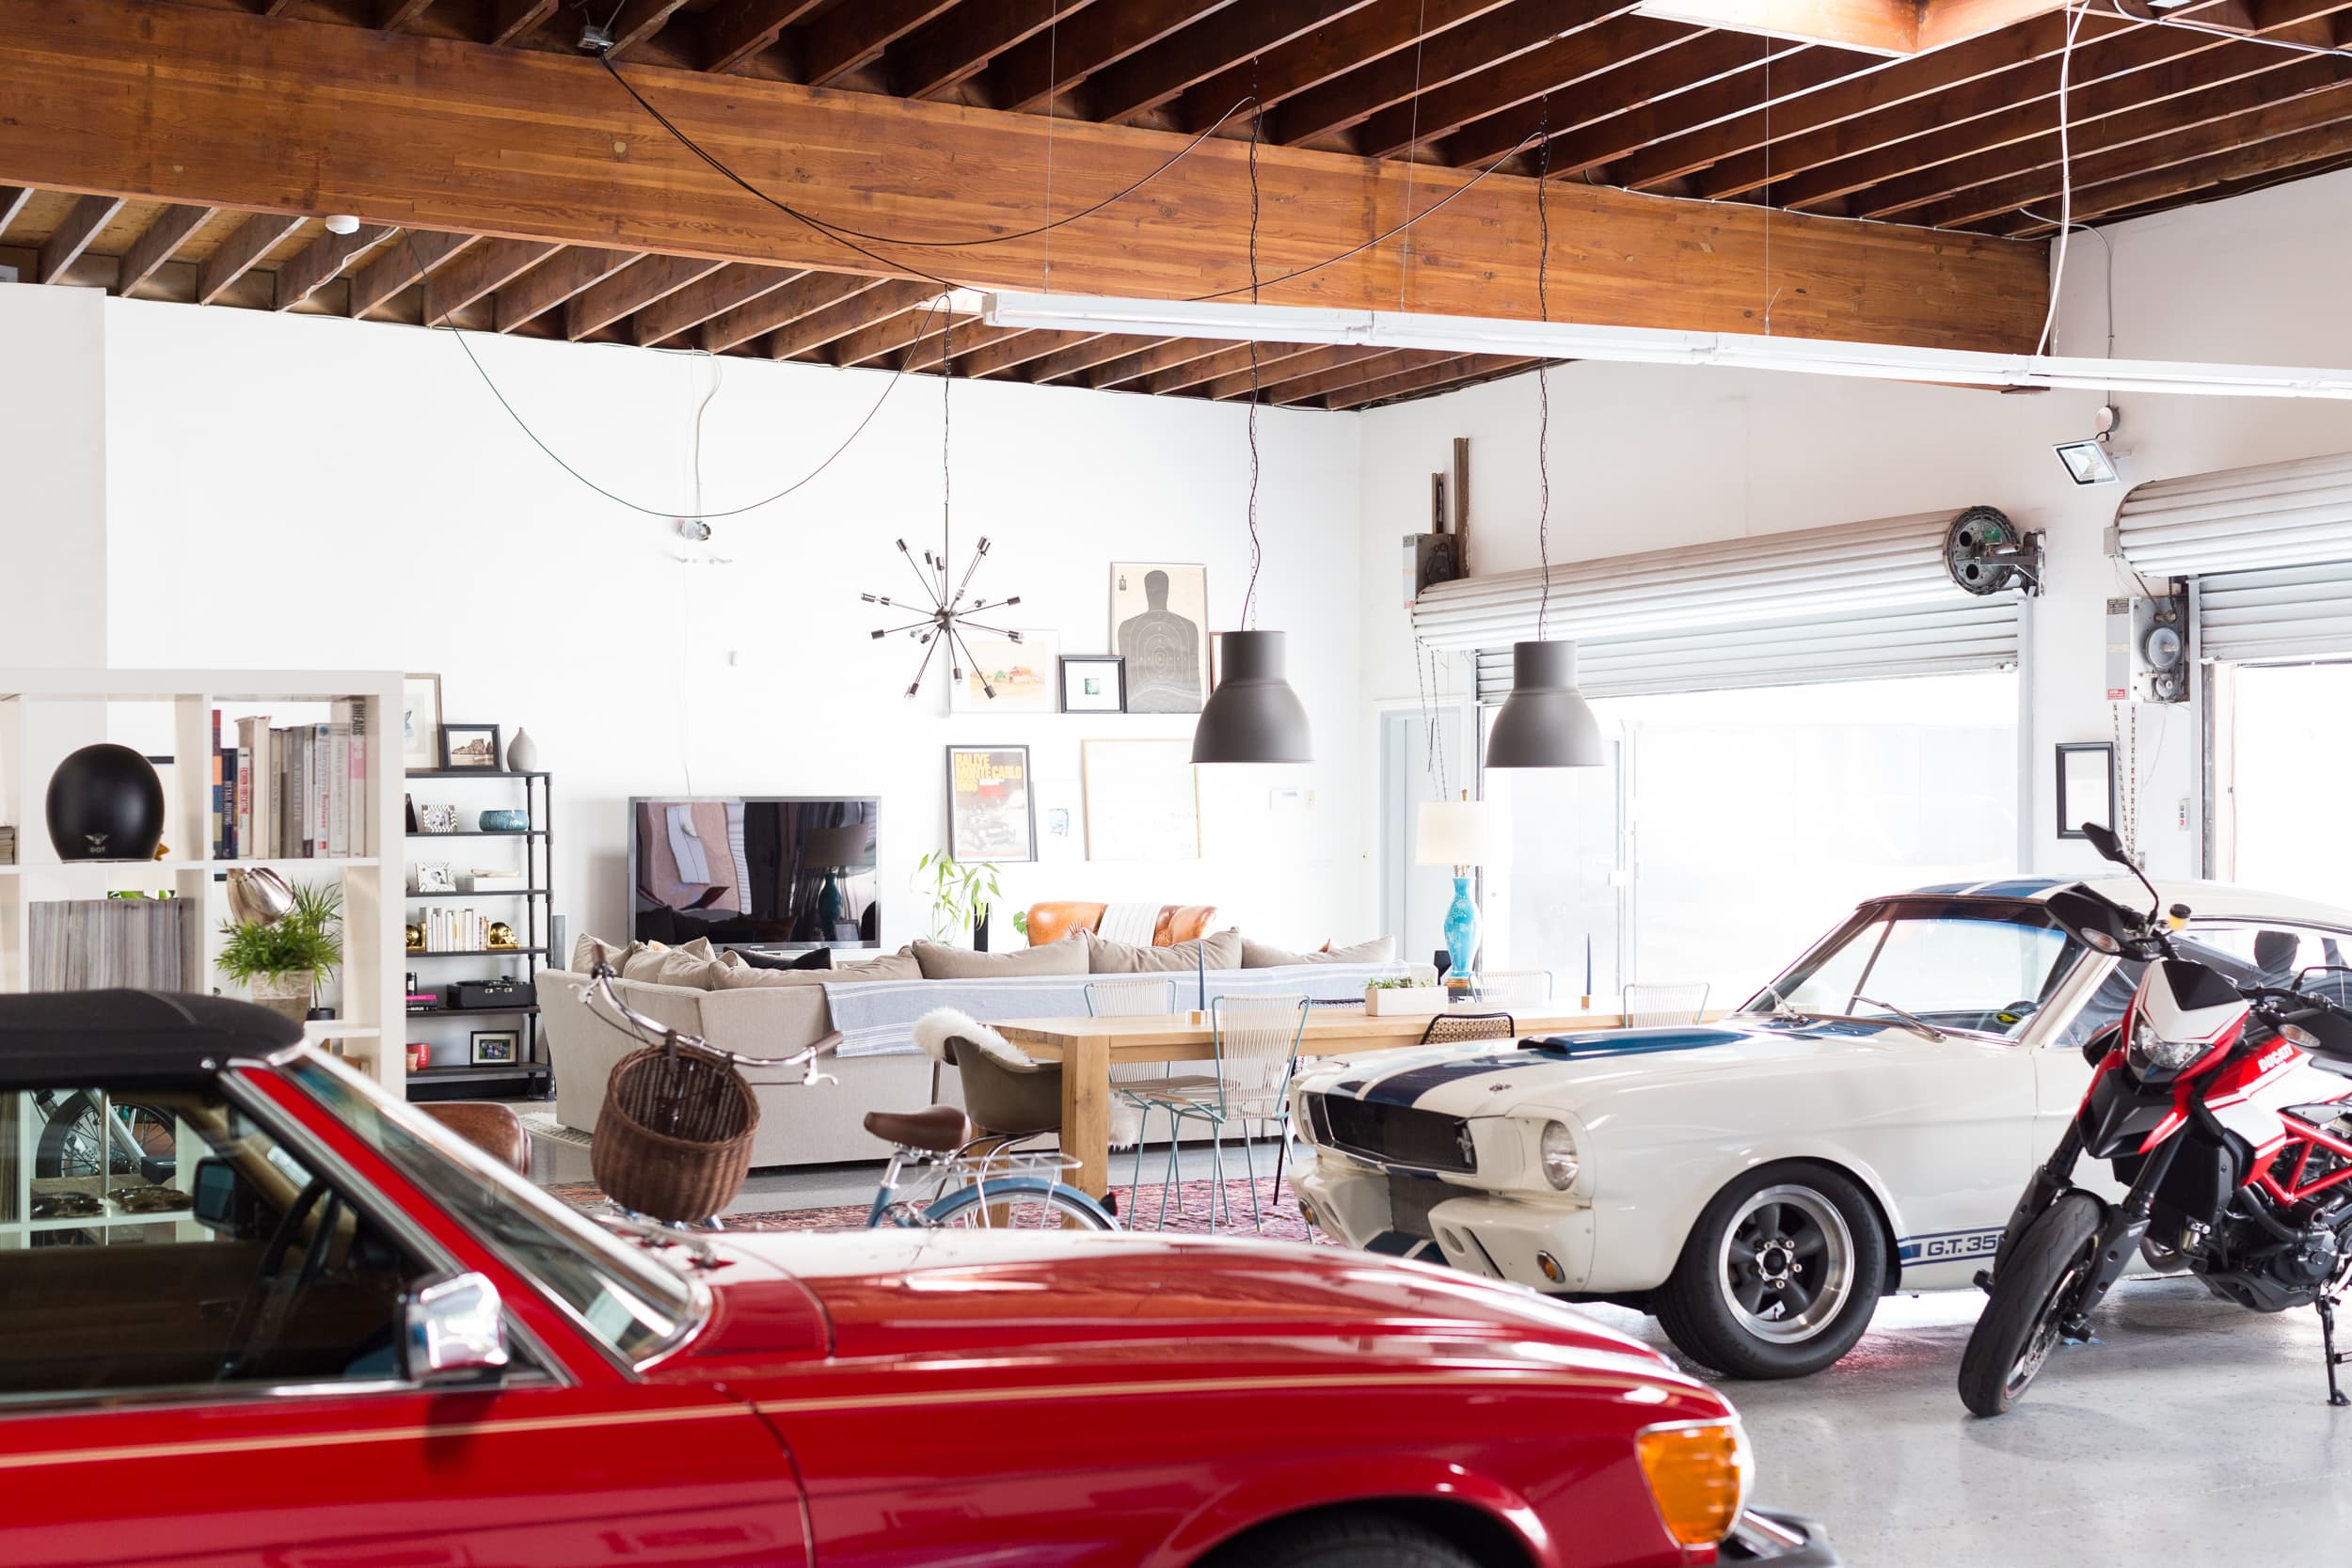 House Tour: A Former Auto Body Garage Turned Cool Home